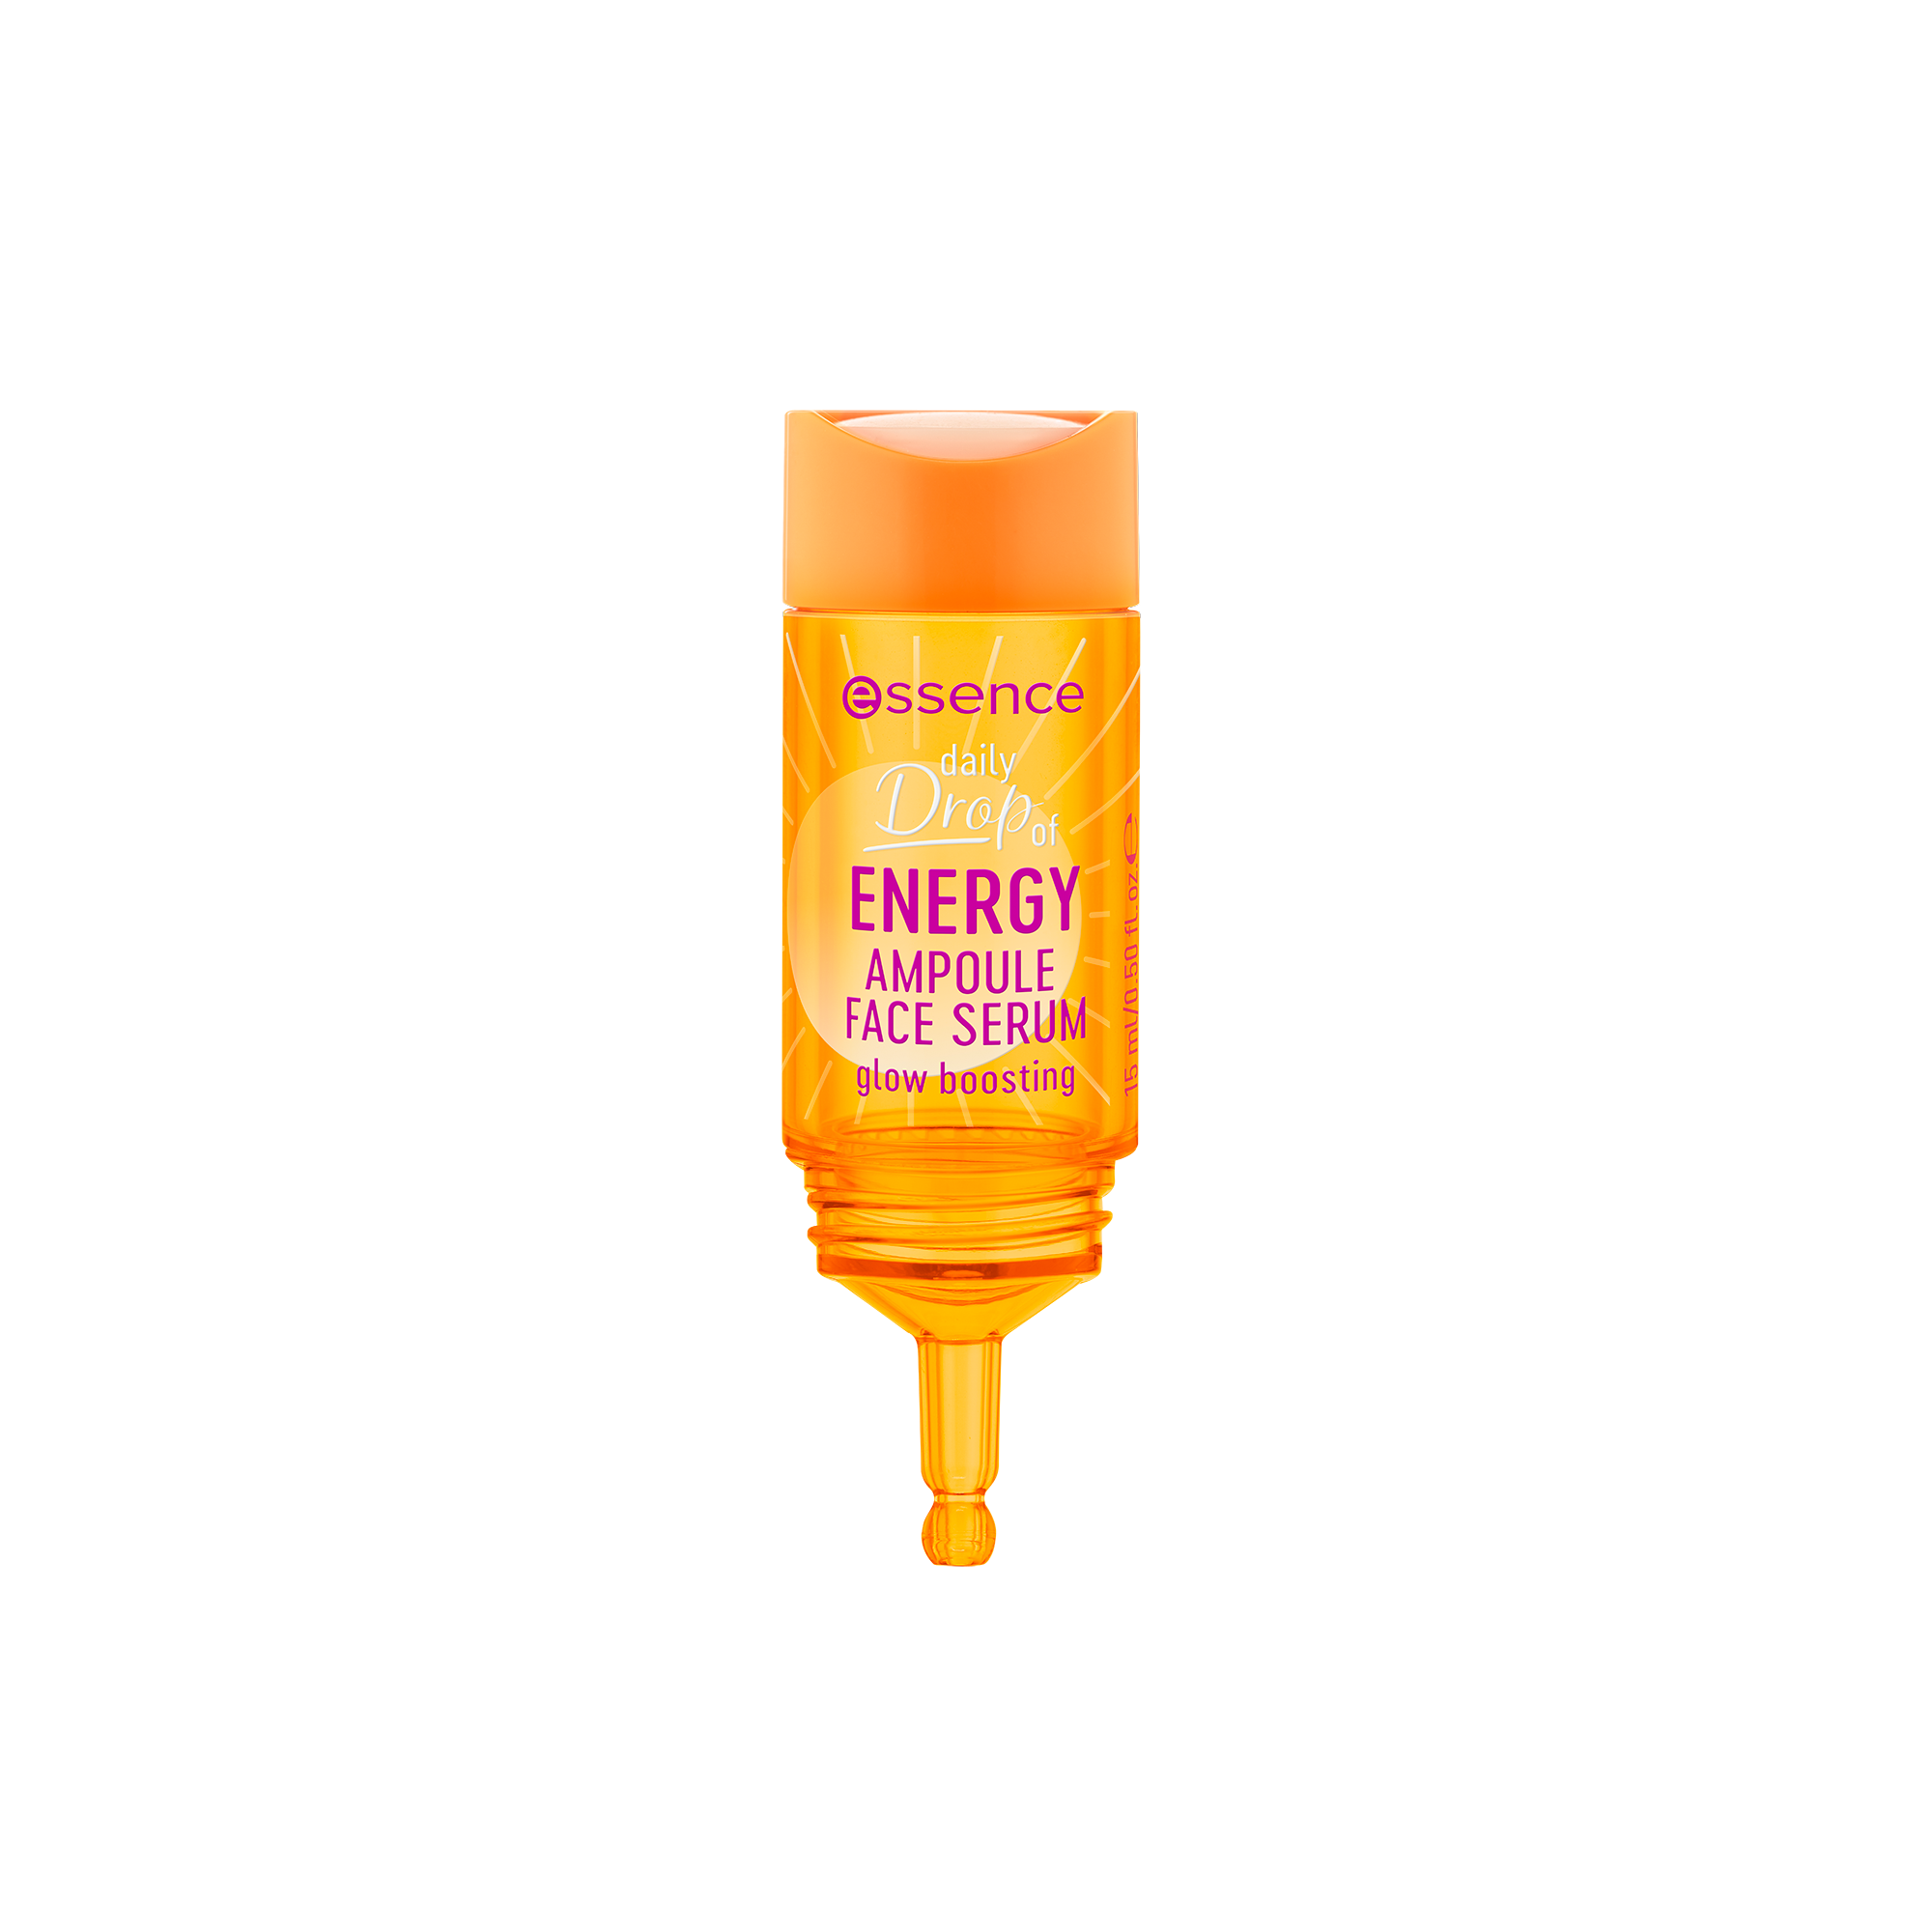 daily Drop of ENERGY AMPOULE FACE SERUM